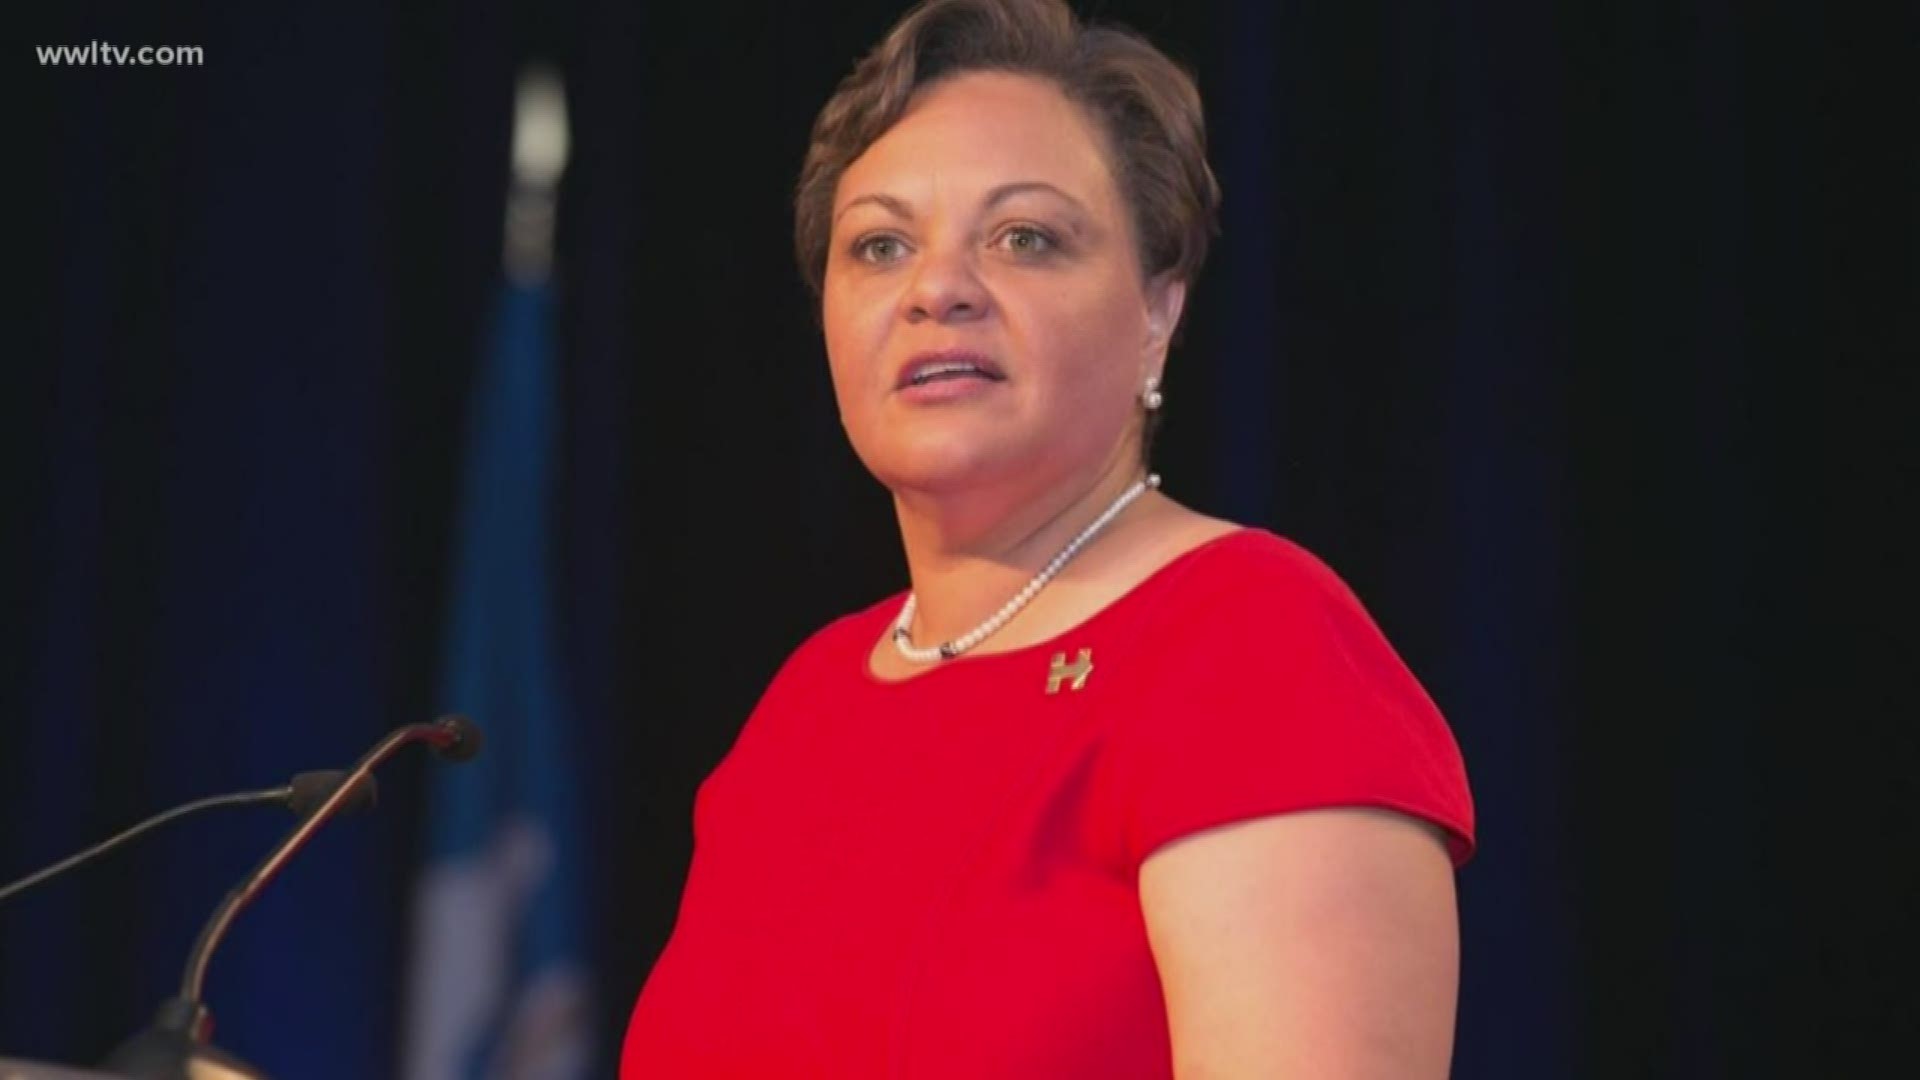 The Louisiana state senator penned a letter to her supporters, admitting to her struggle with addiction